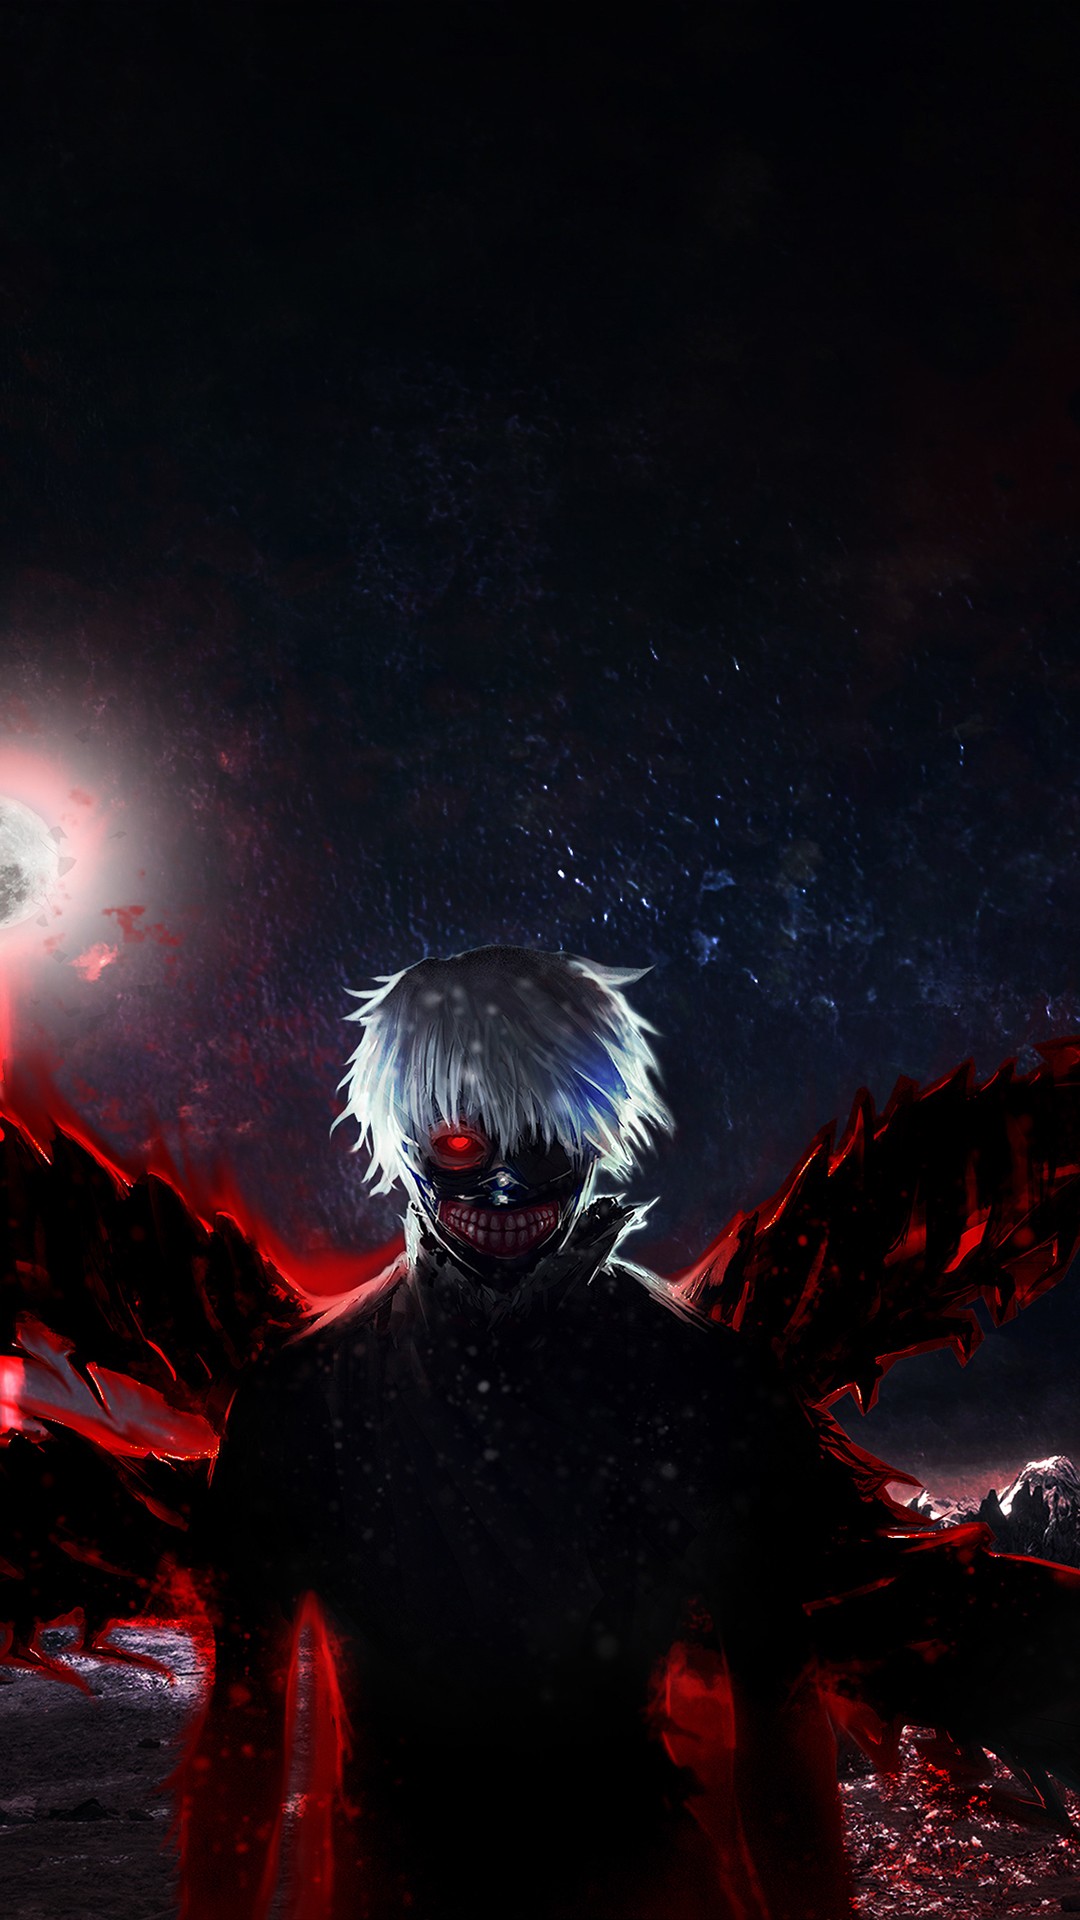 wallpaper tokyo ghoul android,darkness,anime,sky,cg artwork,fictional character